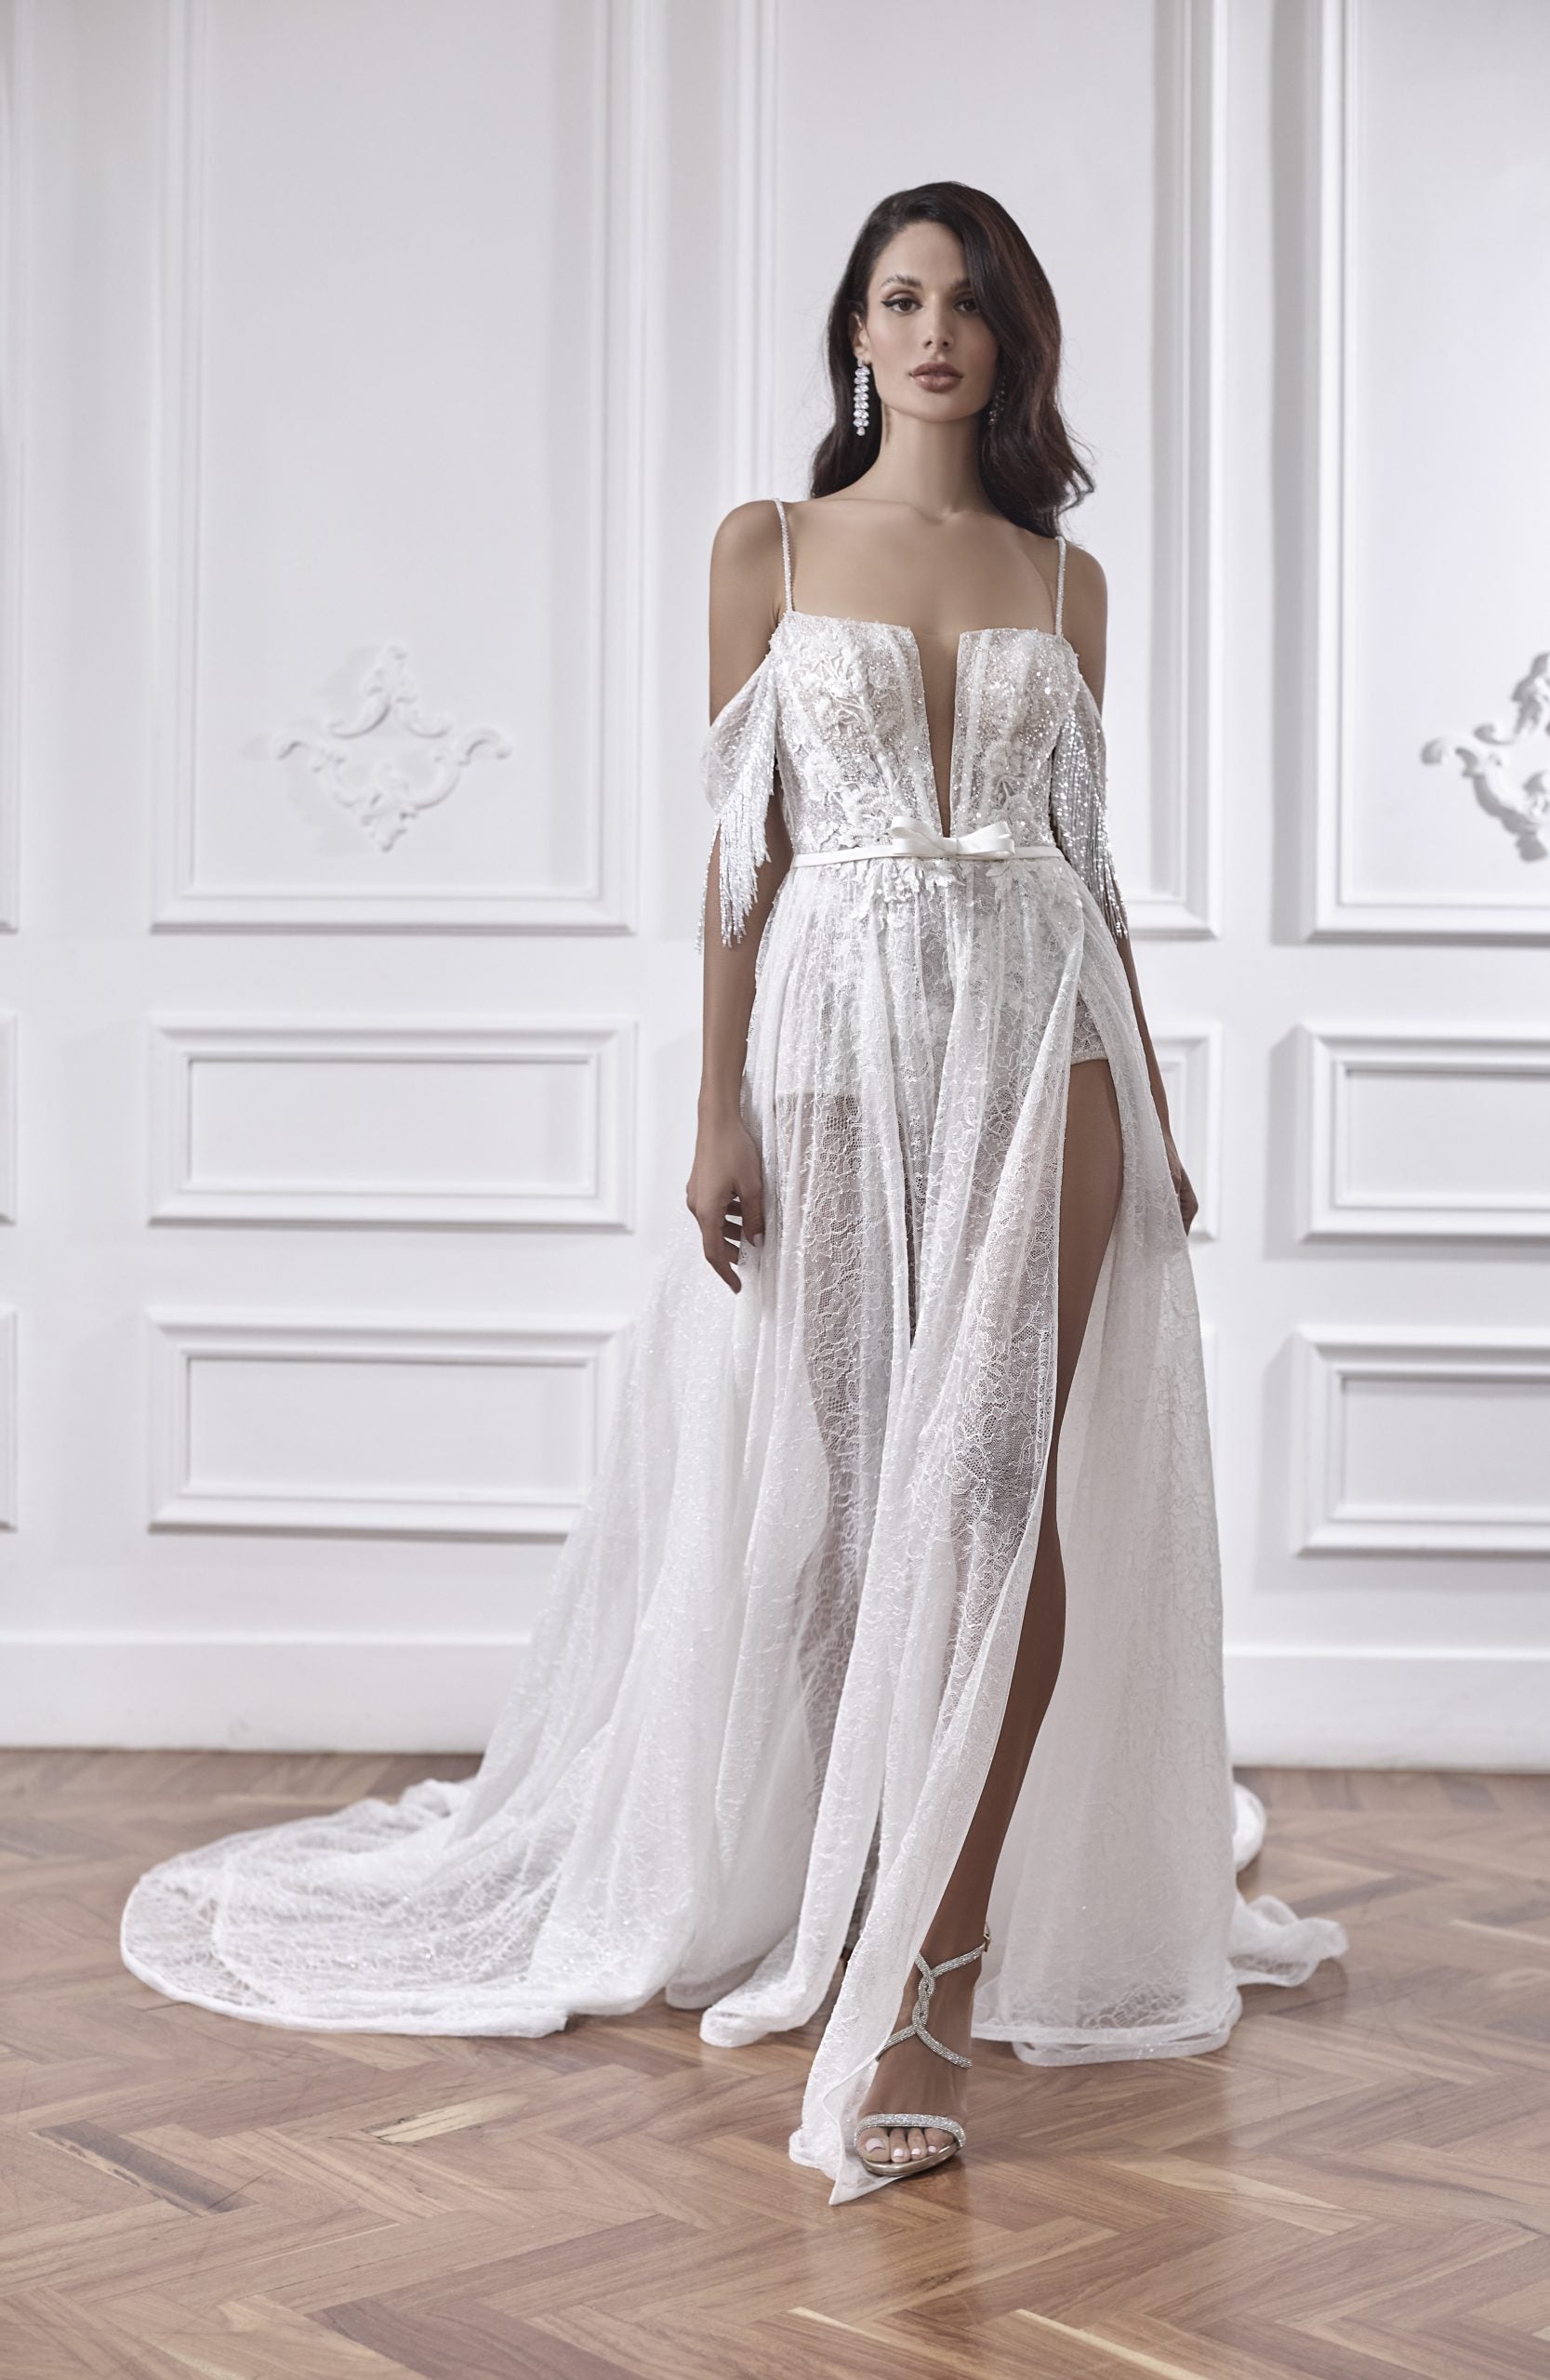 Lace A-line Wedding Dress With Deep V-neckline And High Slit by Maison Signore - Image 1